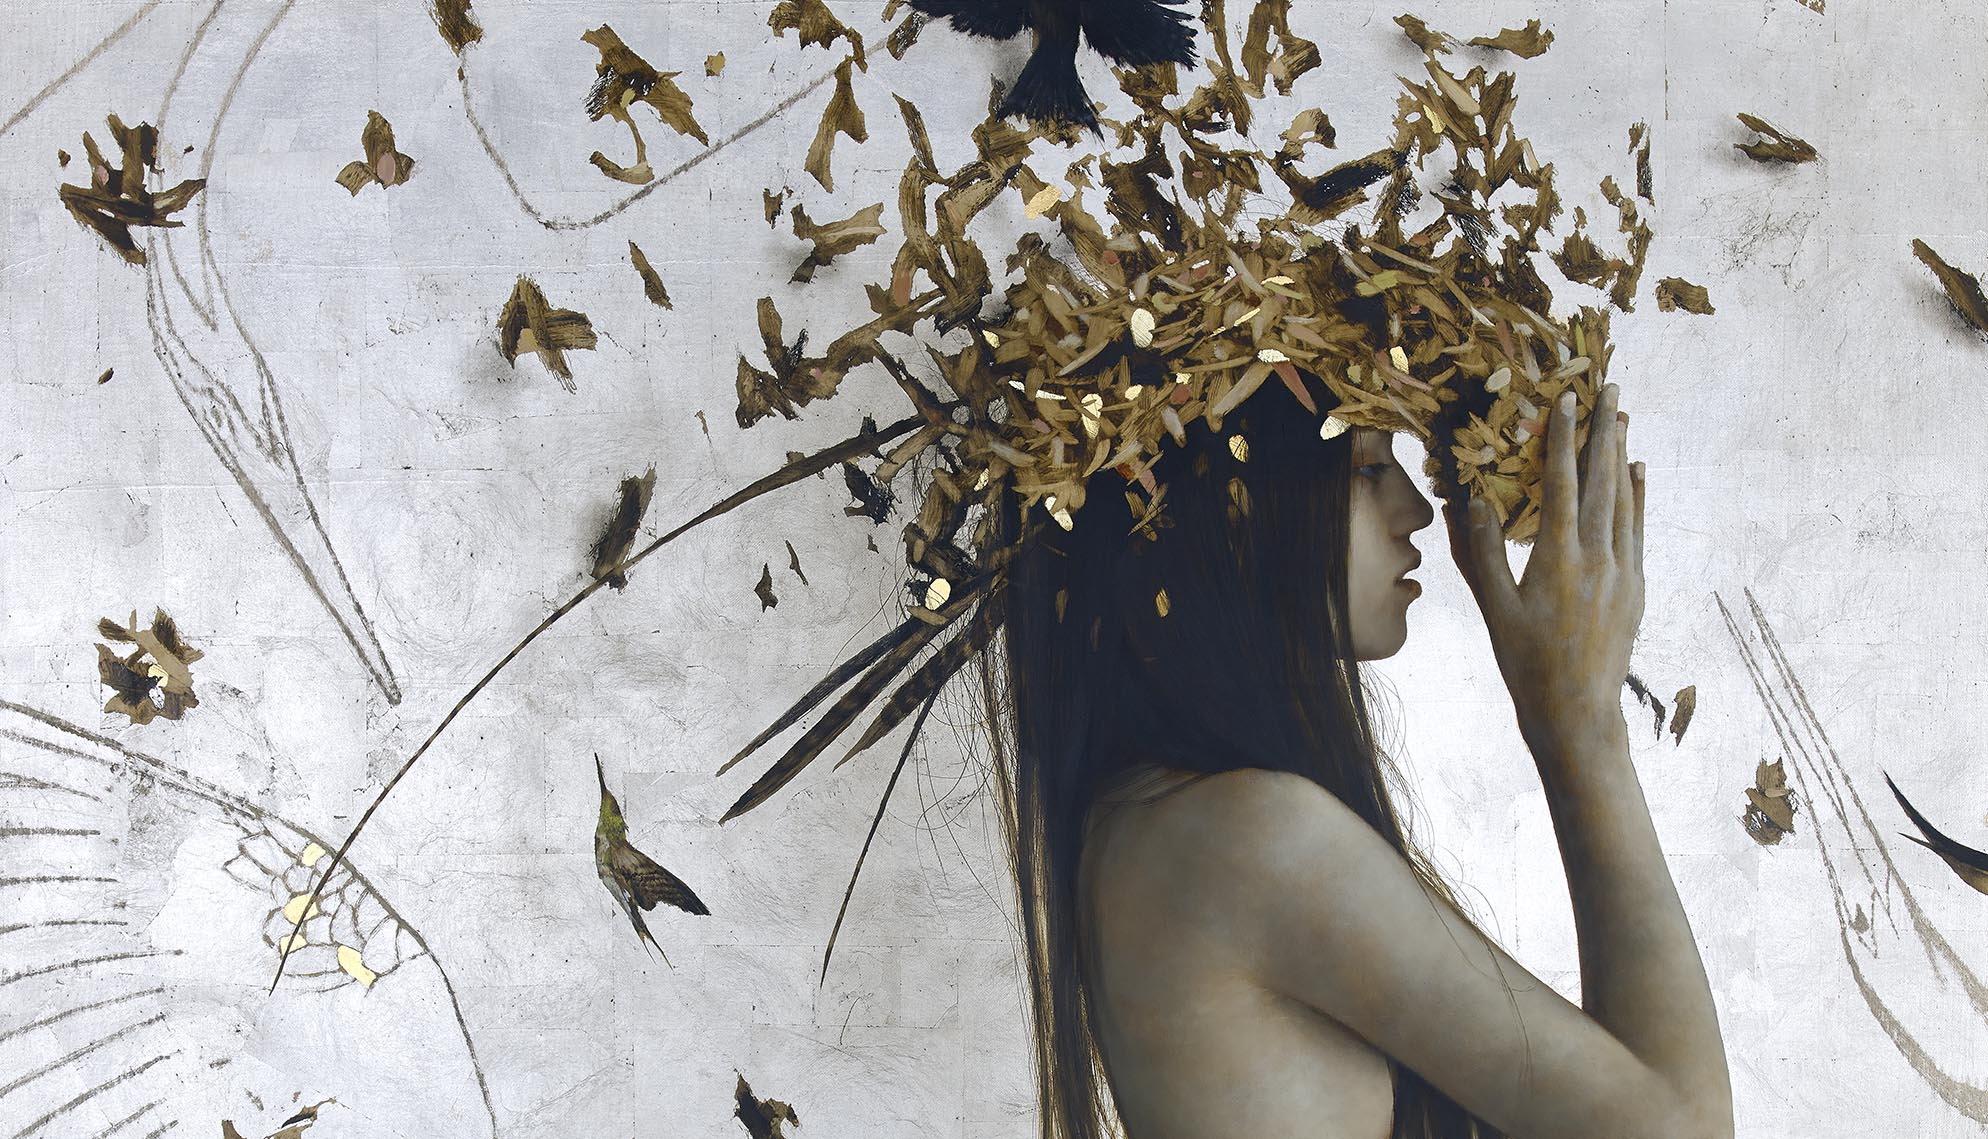 Brad Kunkle figurative painting on the cover of beautiful bizarre art magazine issue 27